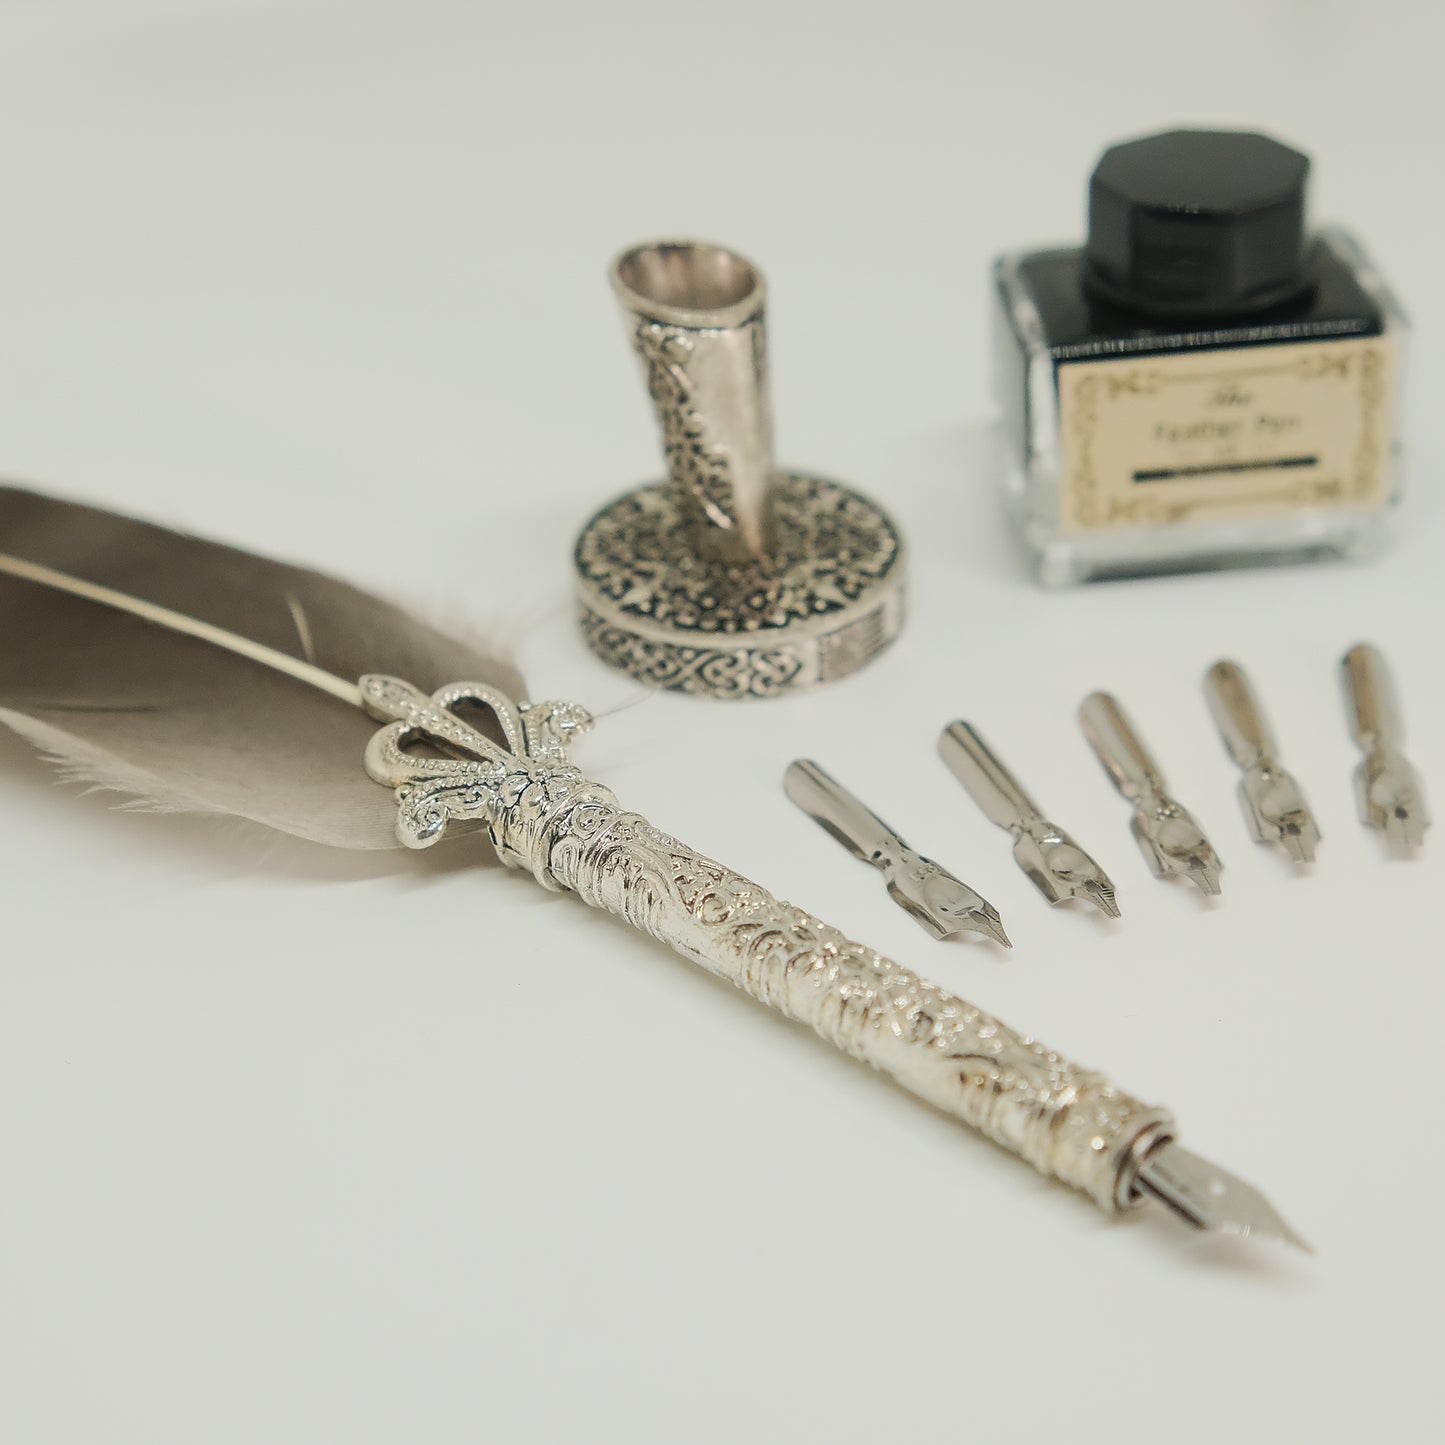 Coles Calligraphy Feather Quill, 5 Nib, 1 Ink bottle & Pen Holder Set -  Silver, Can be personalised